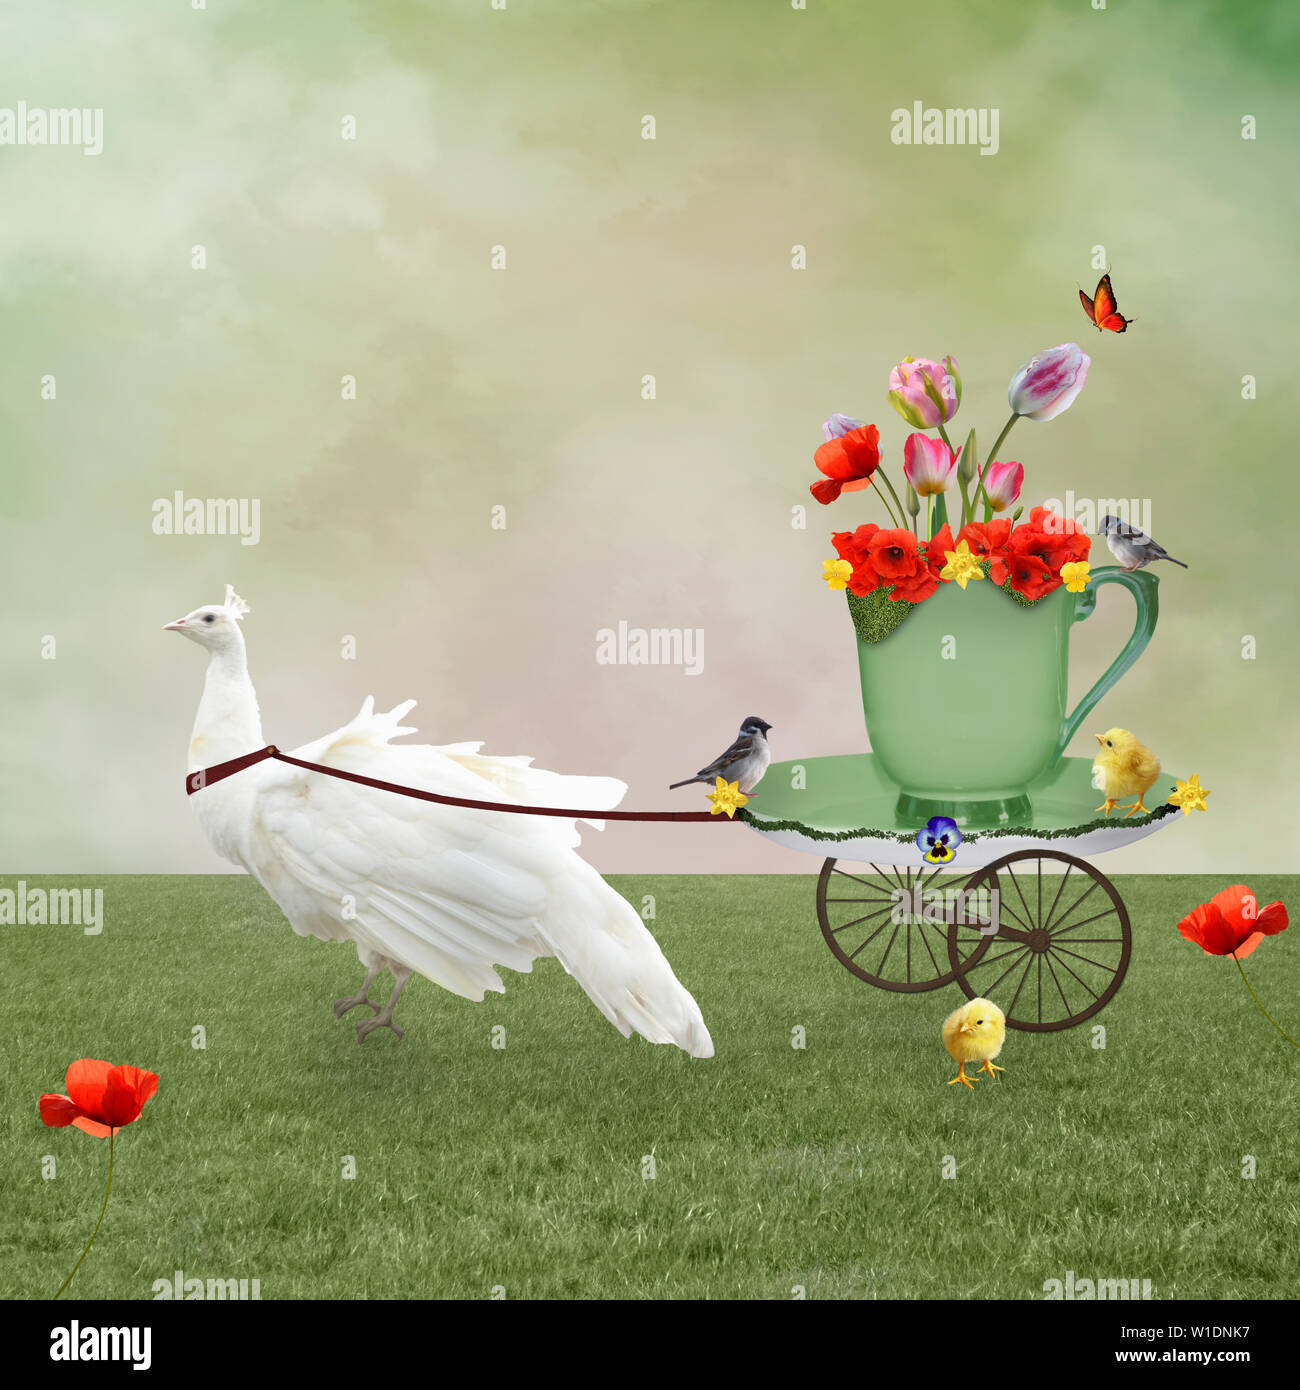 Surreal scenery with a white peacock dragging a carriage in the shape of a cup full of flowers Stock Photo